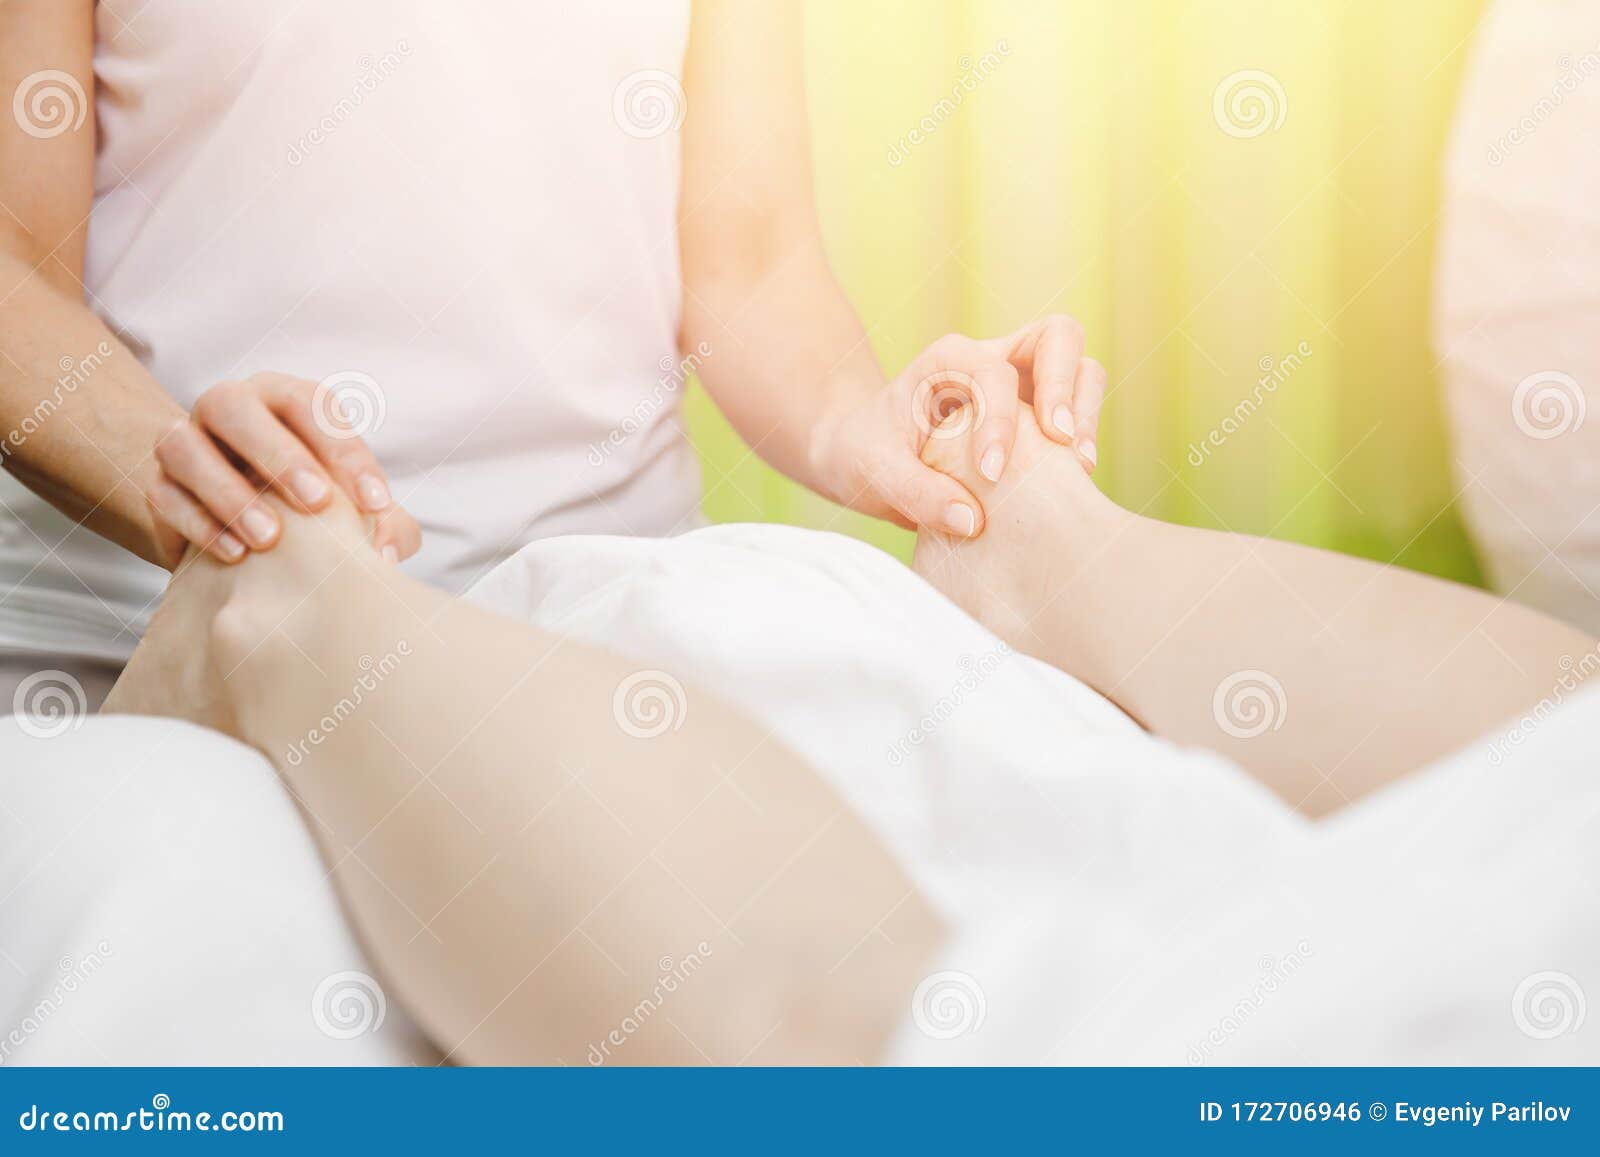 Foot And Heel Legs Massage Of Young Women Beauty Spa Stock Photo